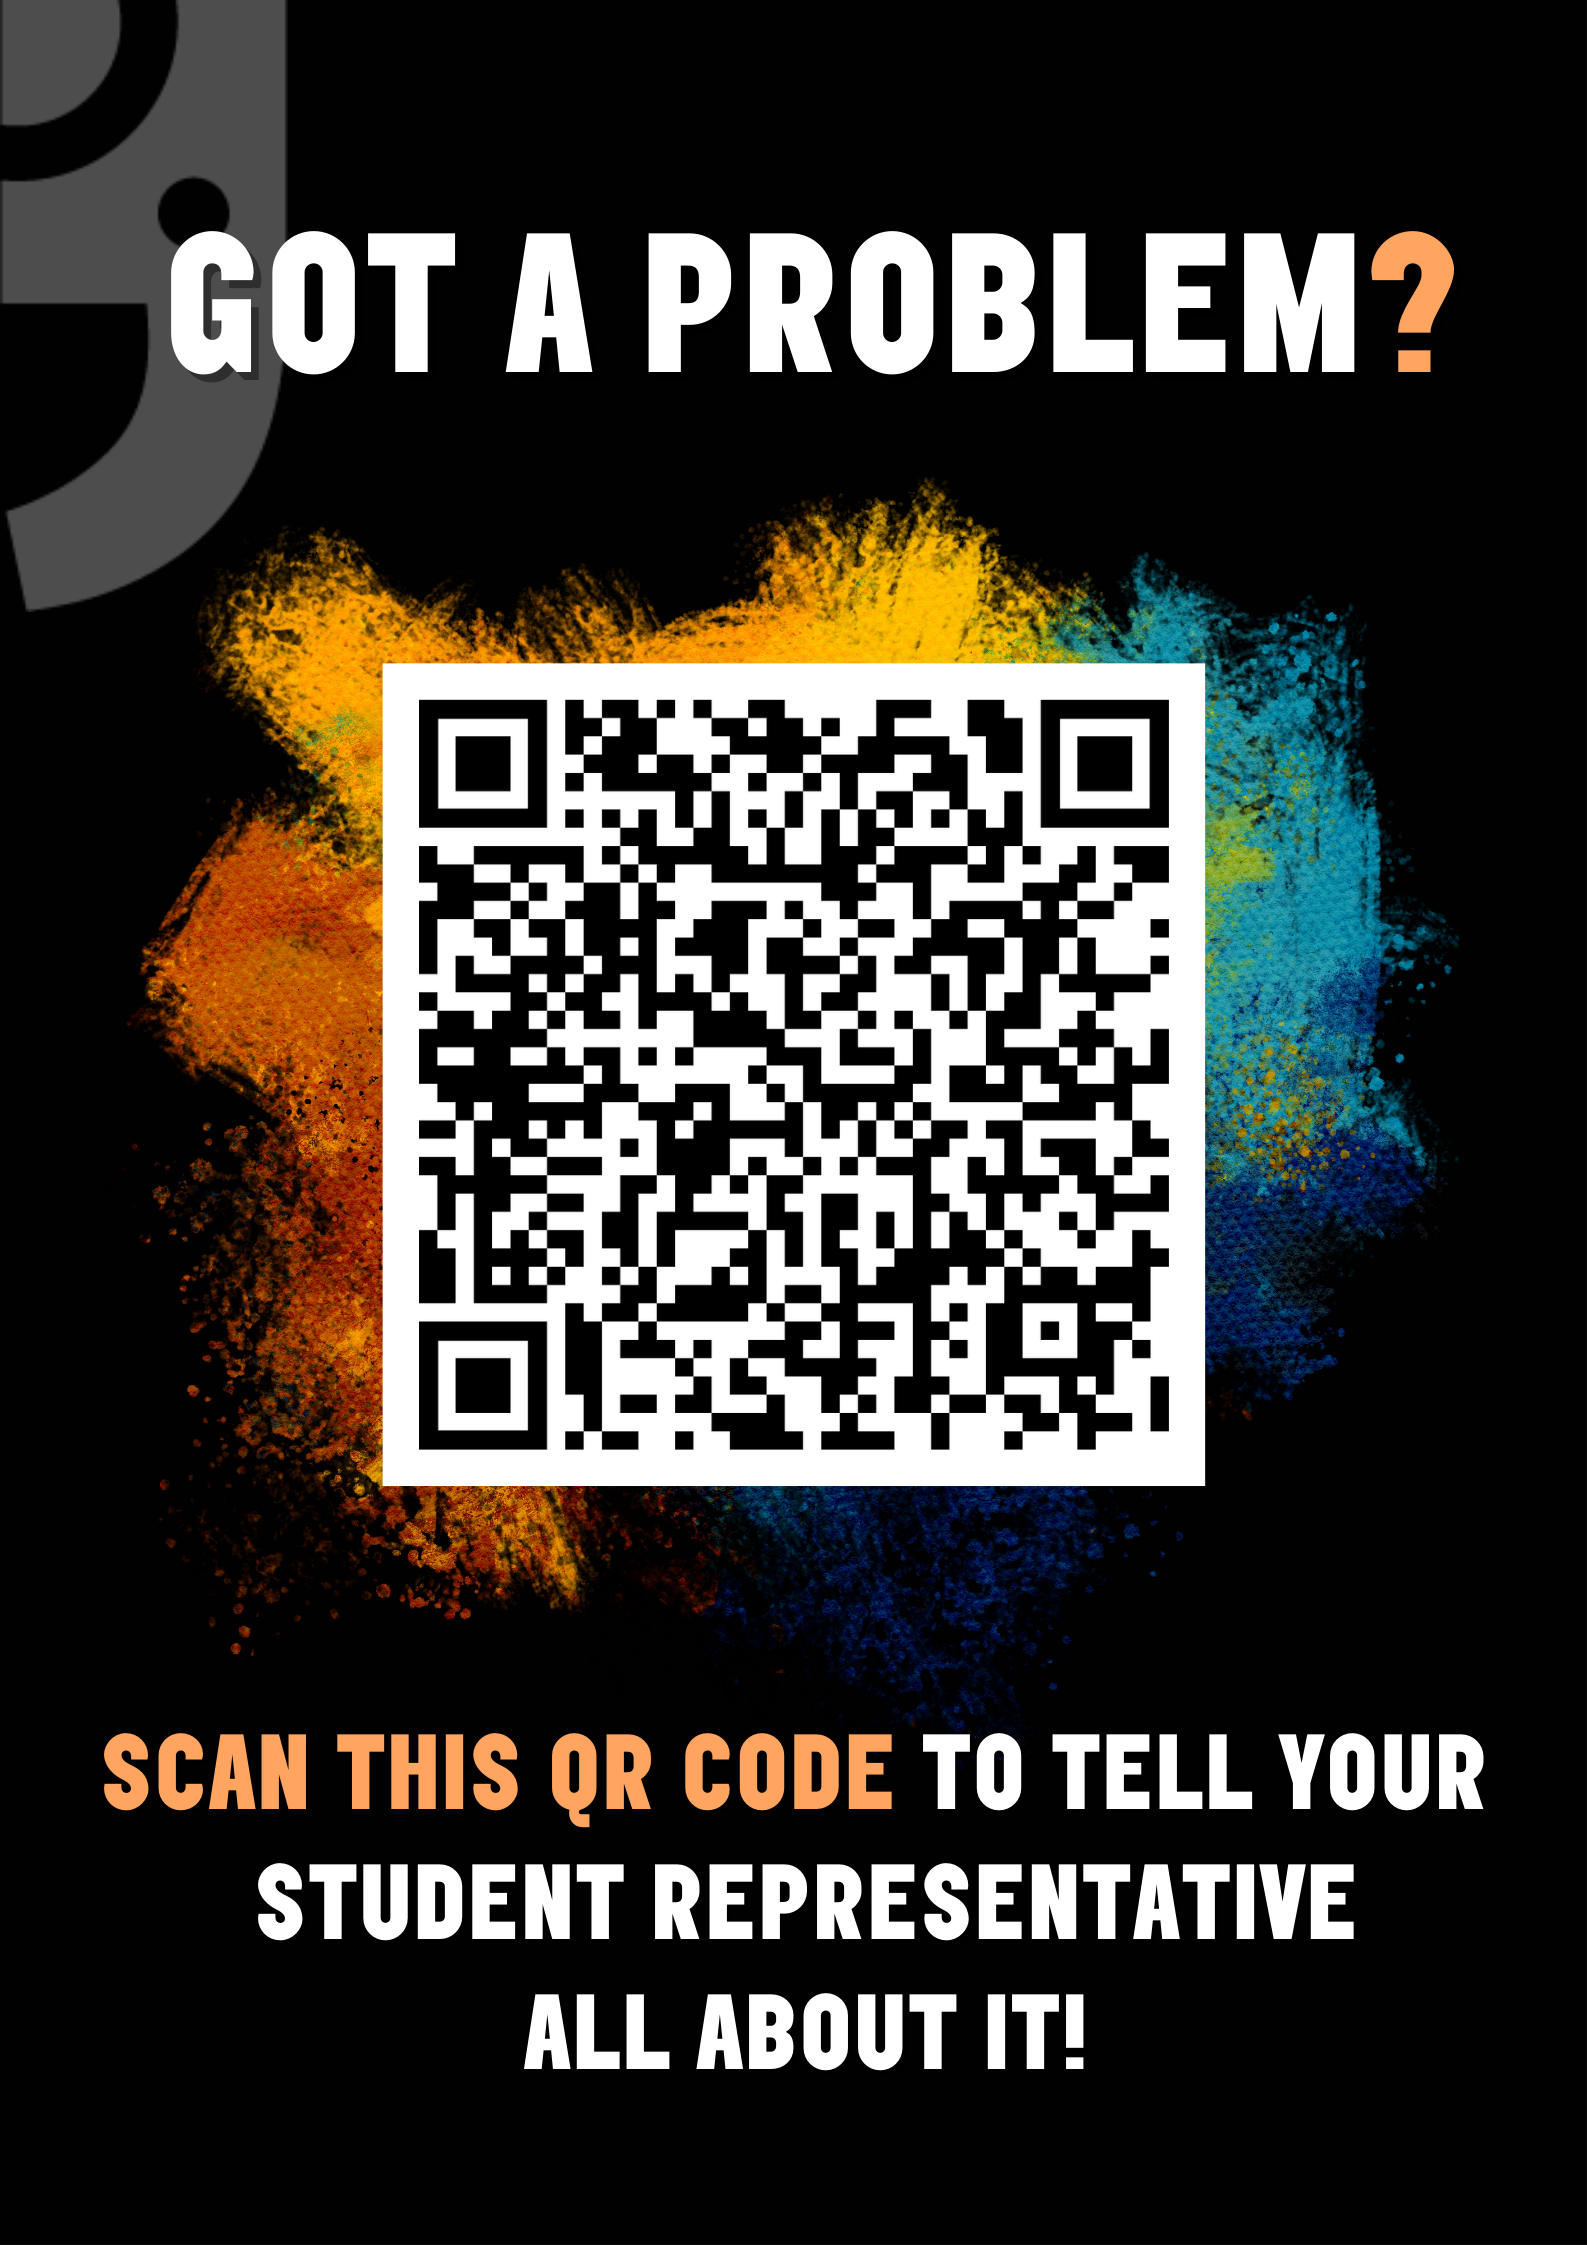 Text on poster says. Got a problem? Scan this QR code to let your student representative know all ab